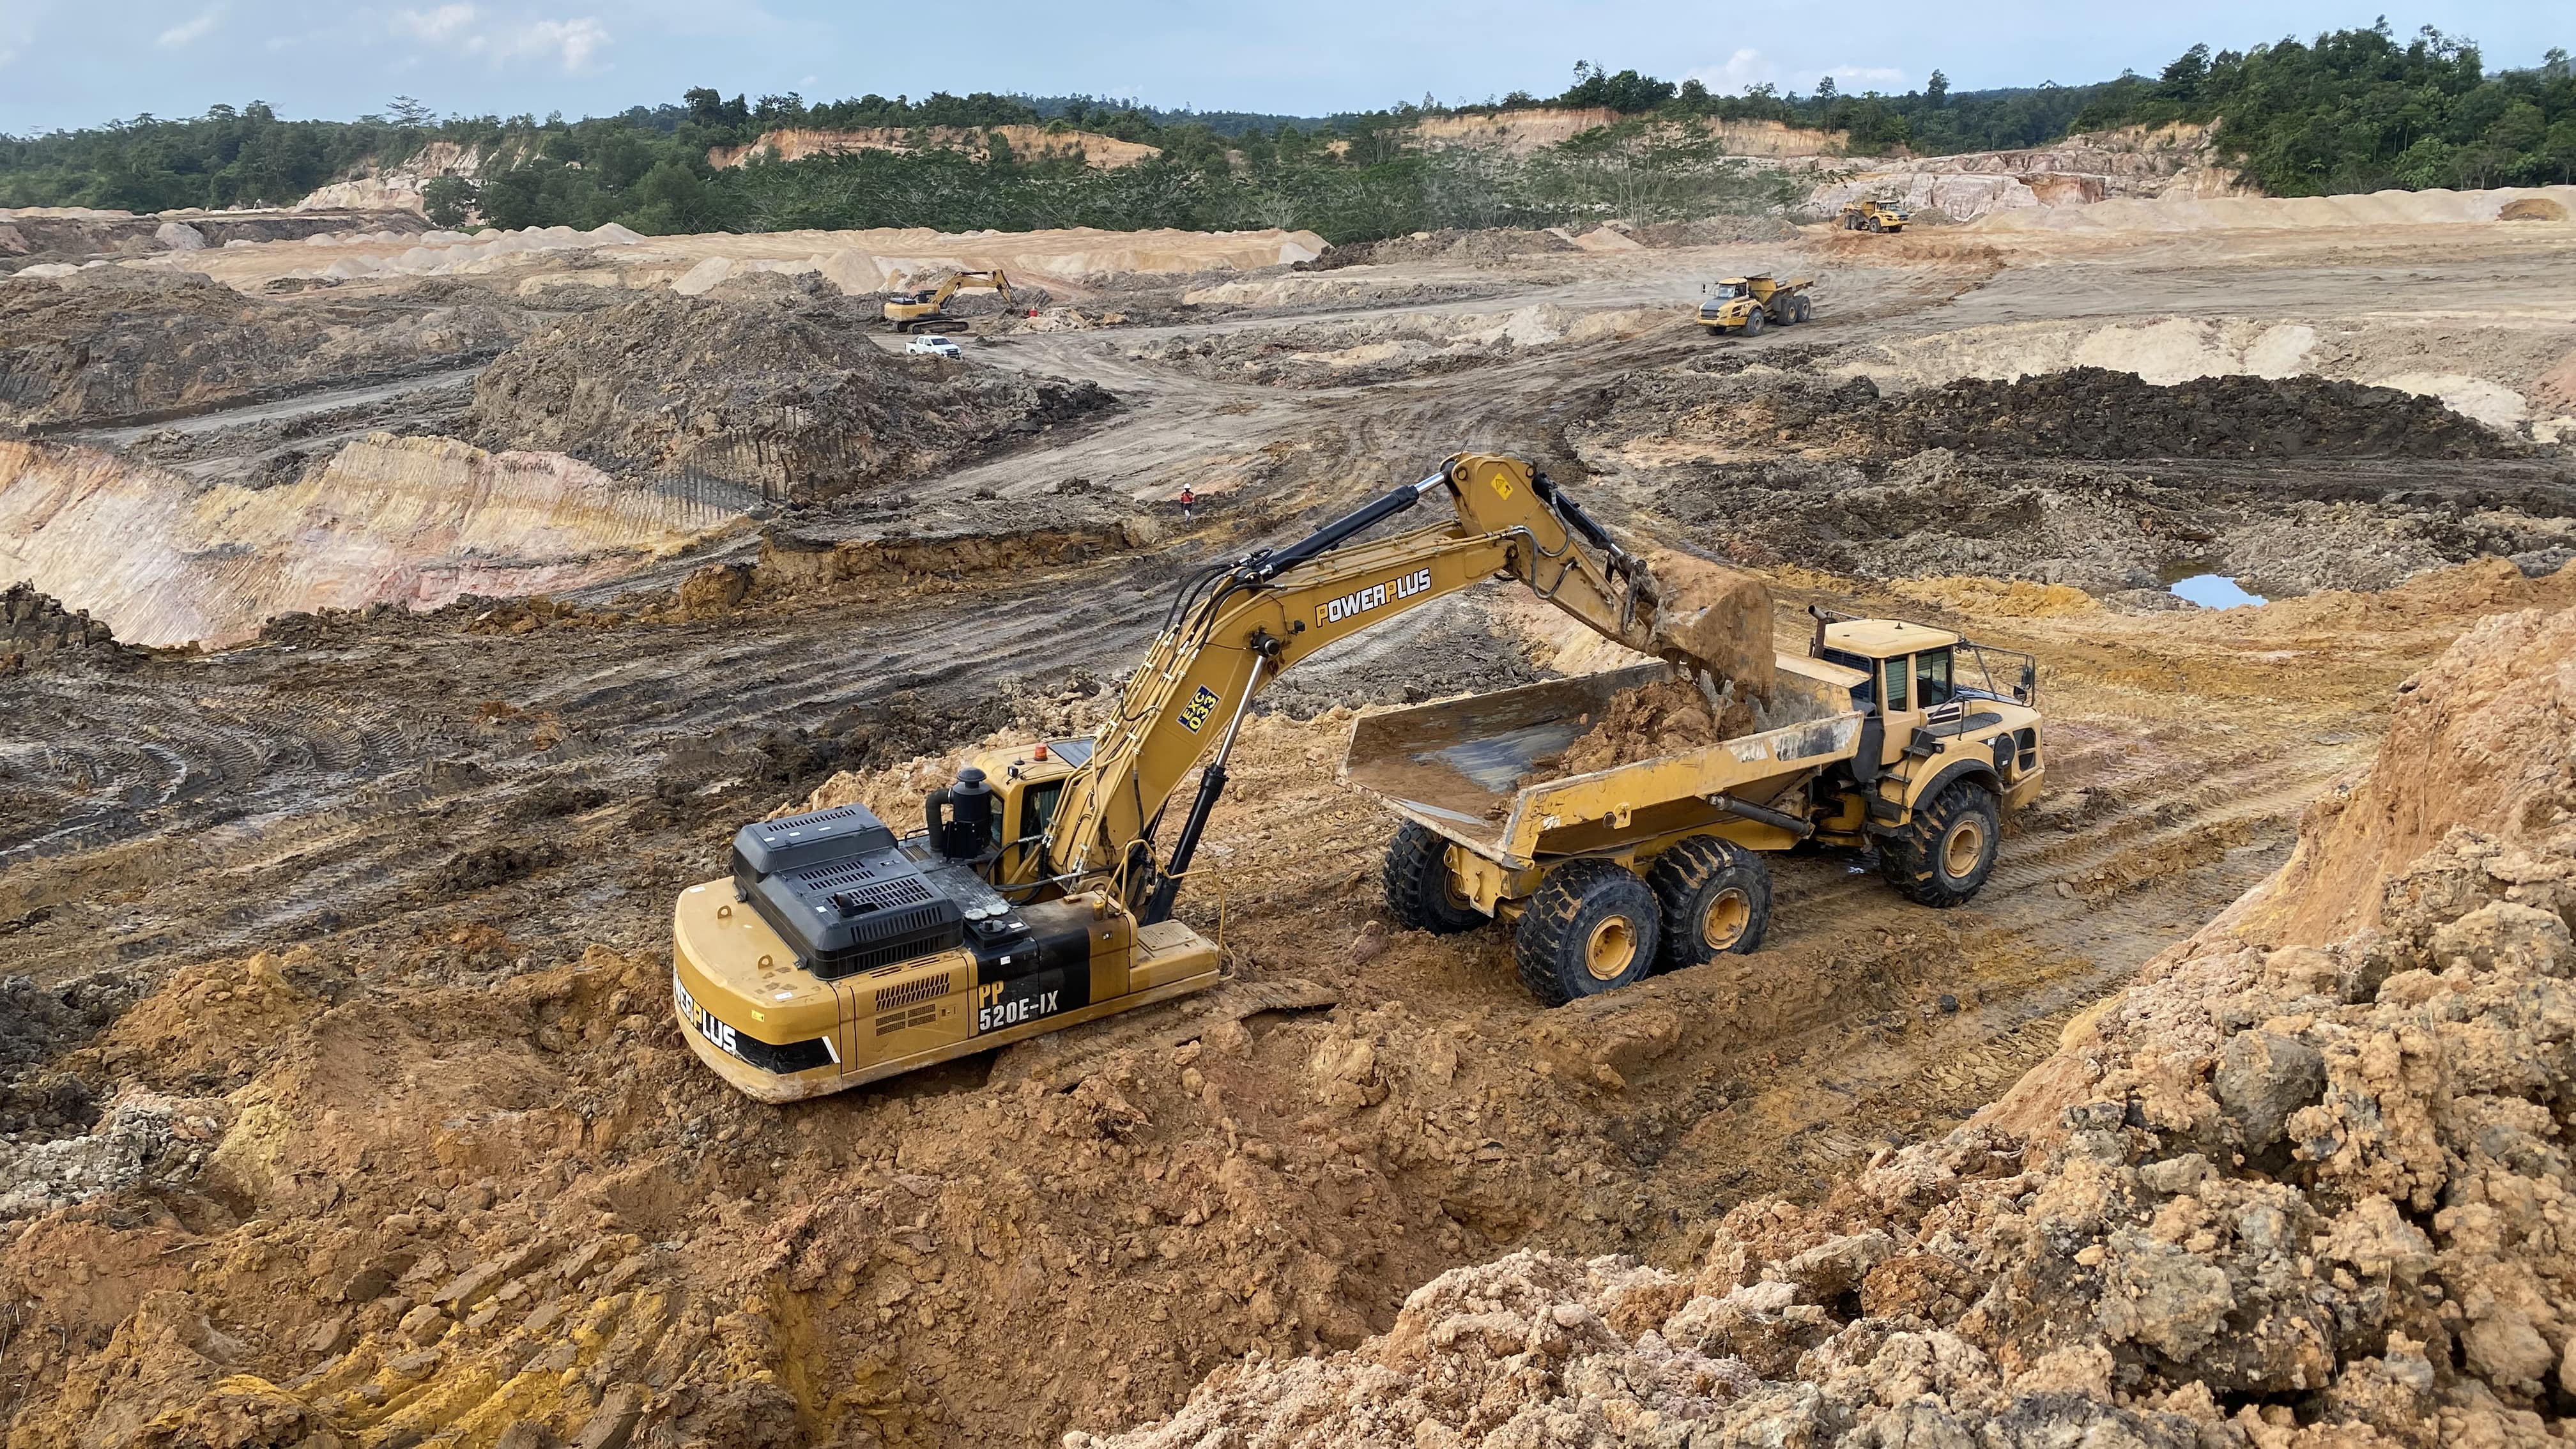 Powerplus Excavators are robust equipment used for mining operations globally.